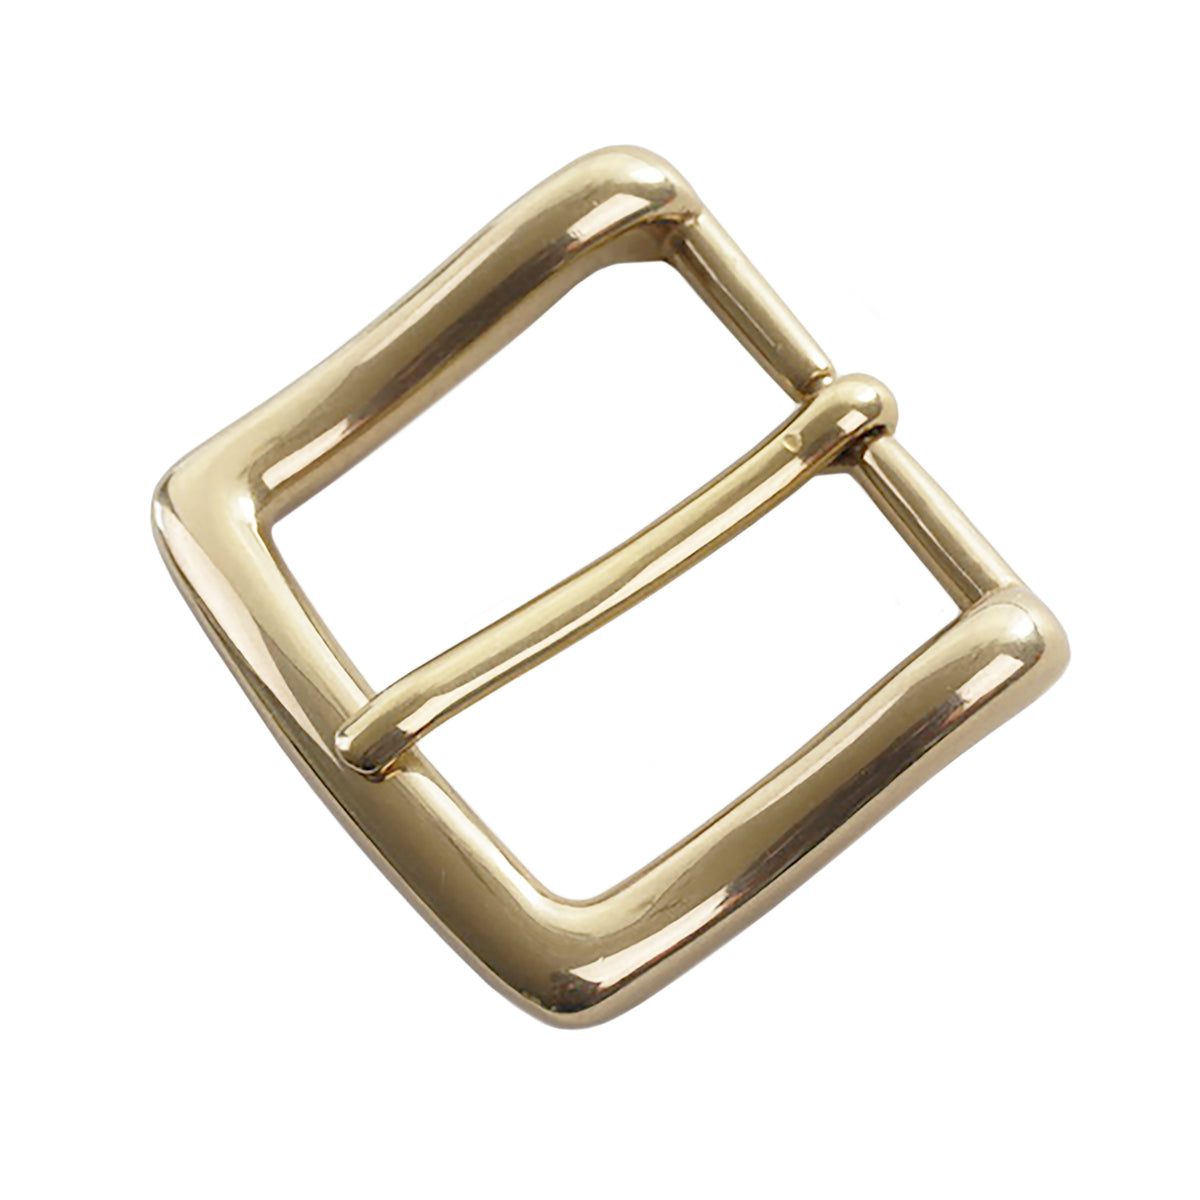 Solid Brass Belt Buckle, With a Fluted Shell Design, Inga Nautical